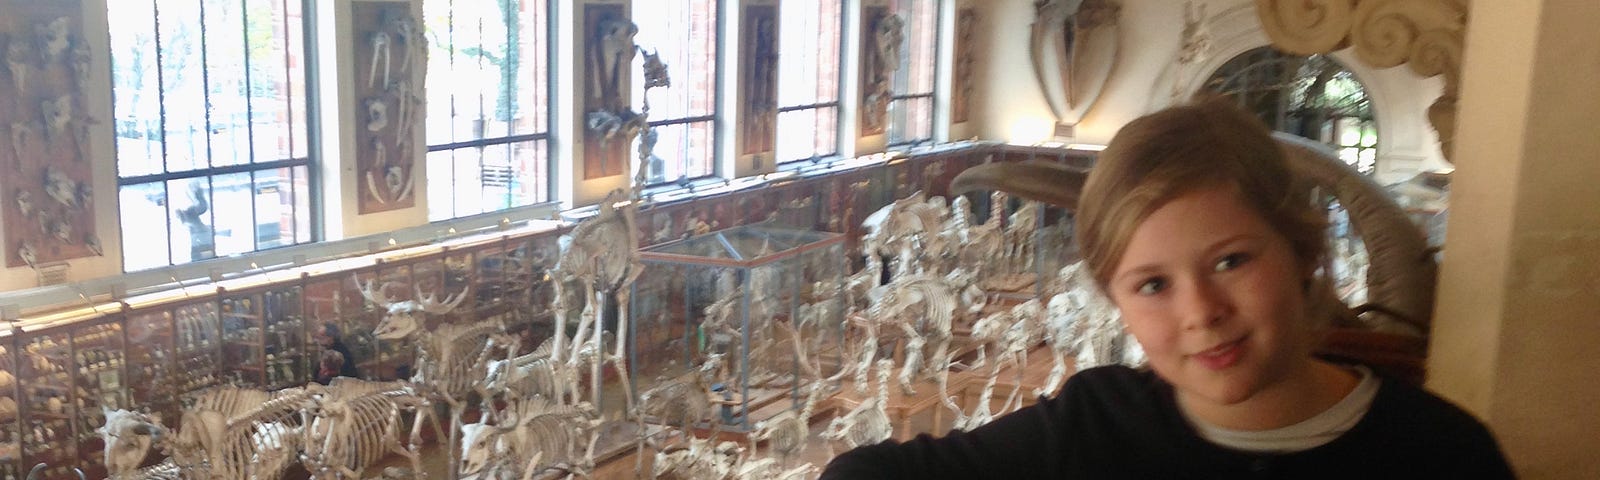 A girl stands on a walkway overlooking a room full of animal skeletons.